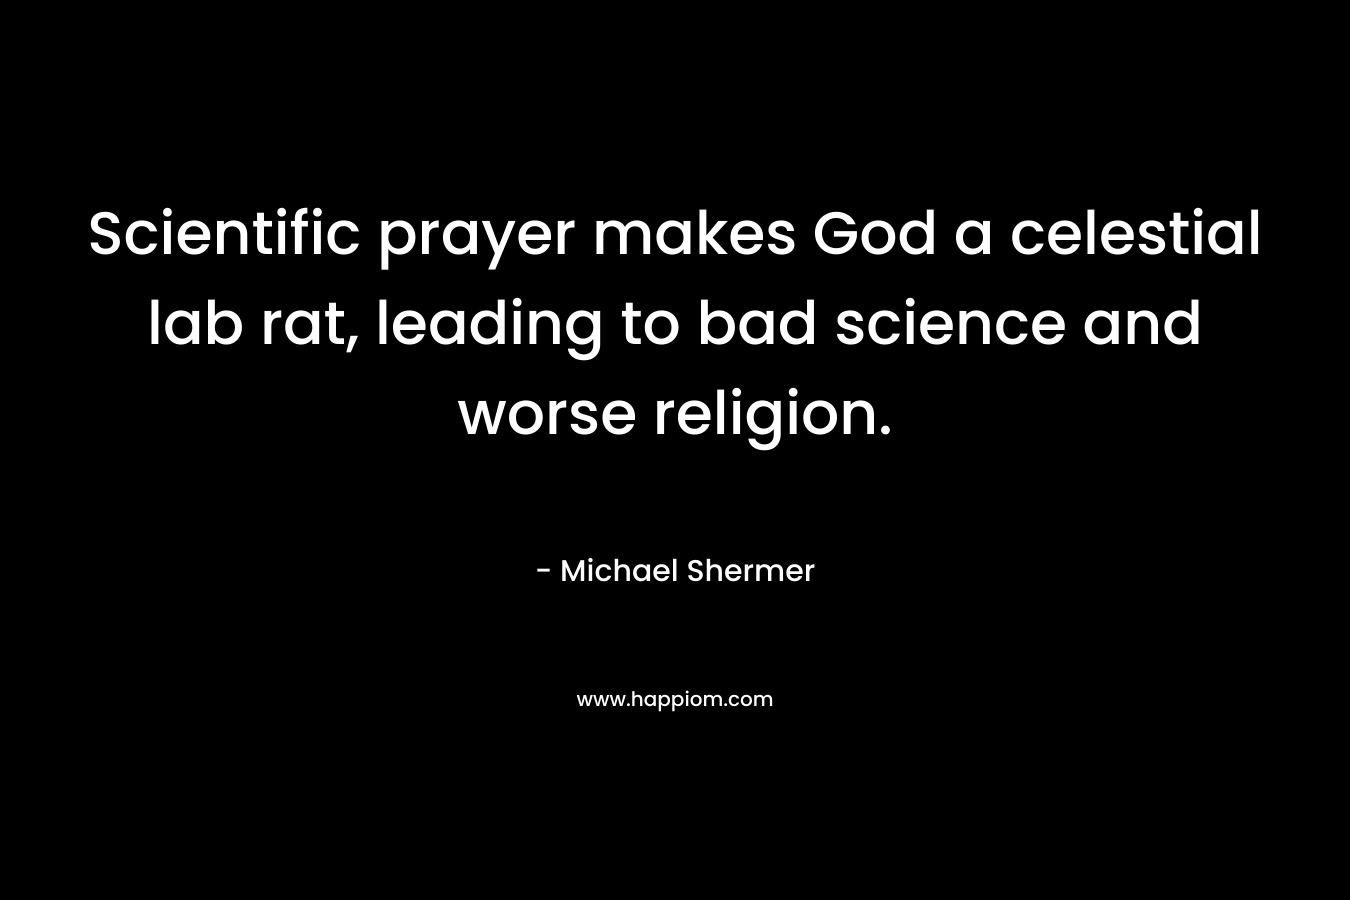 Scientific prayer makes God a celestial lab rat, leading to bad science and worse religion.